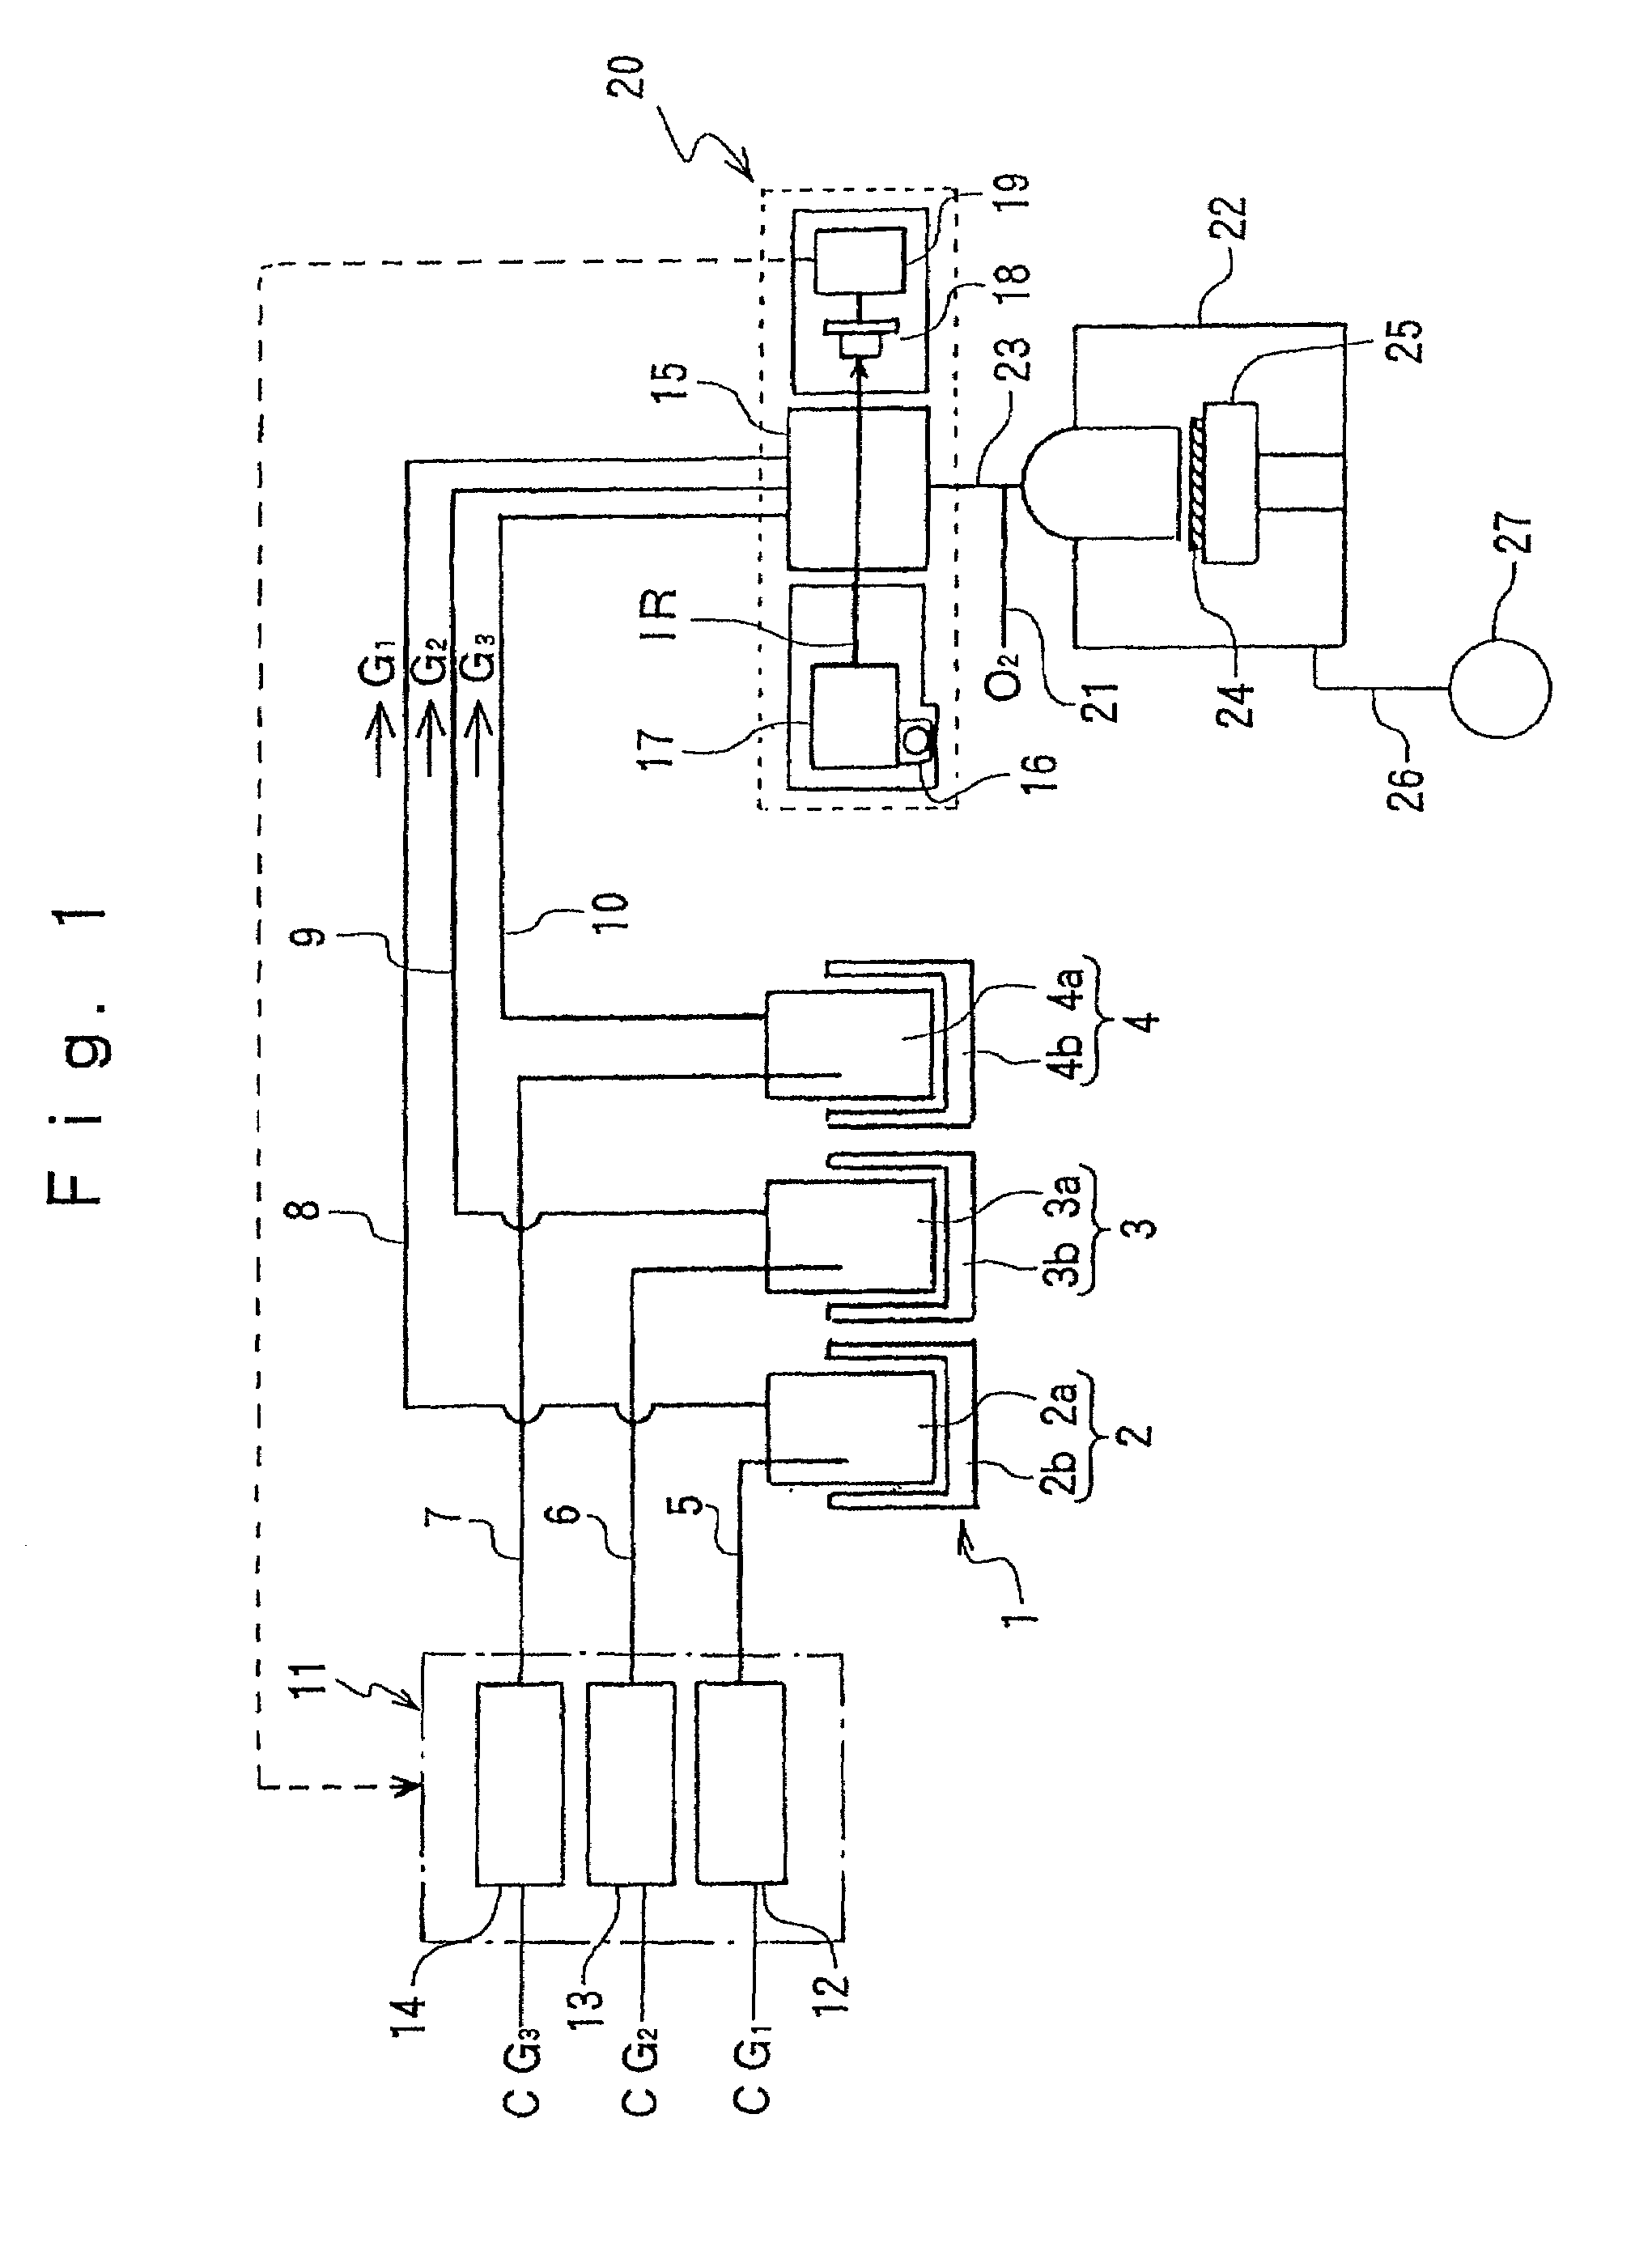 Thin film deposition device using an FTIR gas analyzer for mixed gas supply